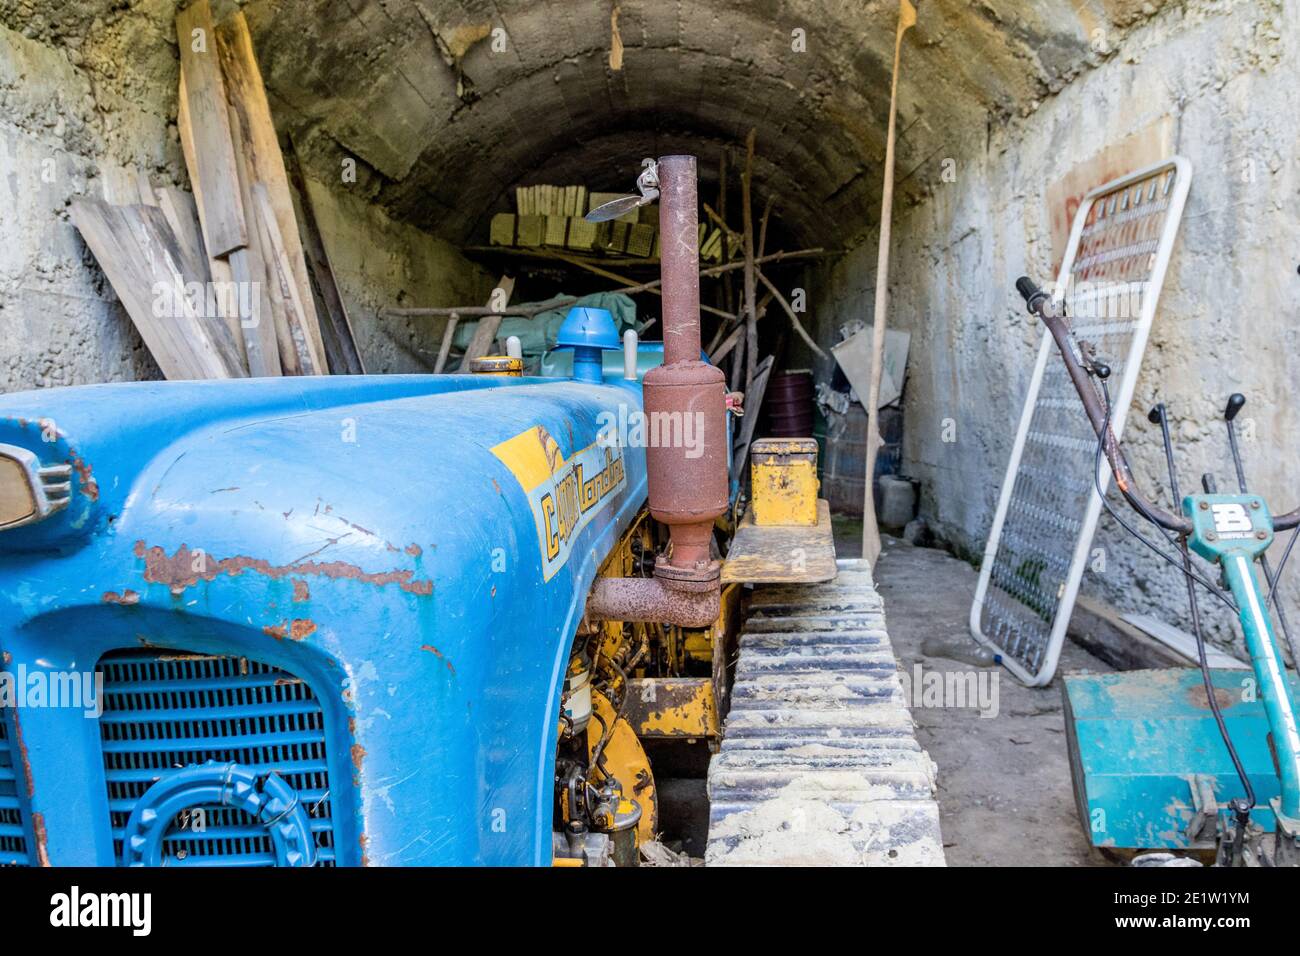 A blue tractor parked inside a repurposed bunker. Albania. Communist-era bunkers were built by dictator Enver Hoxha during the Cold War. Stock Photo